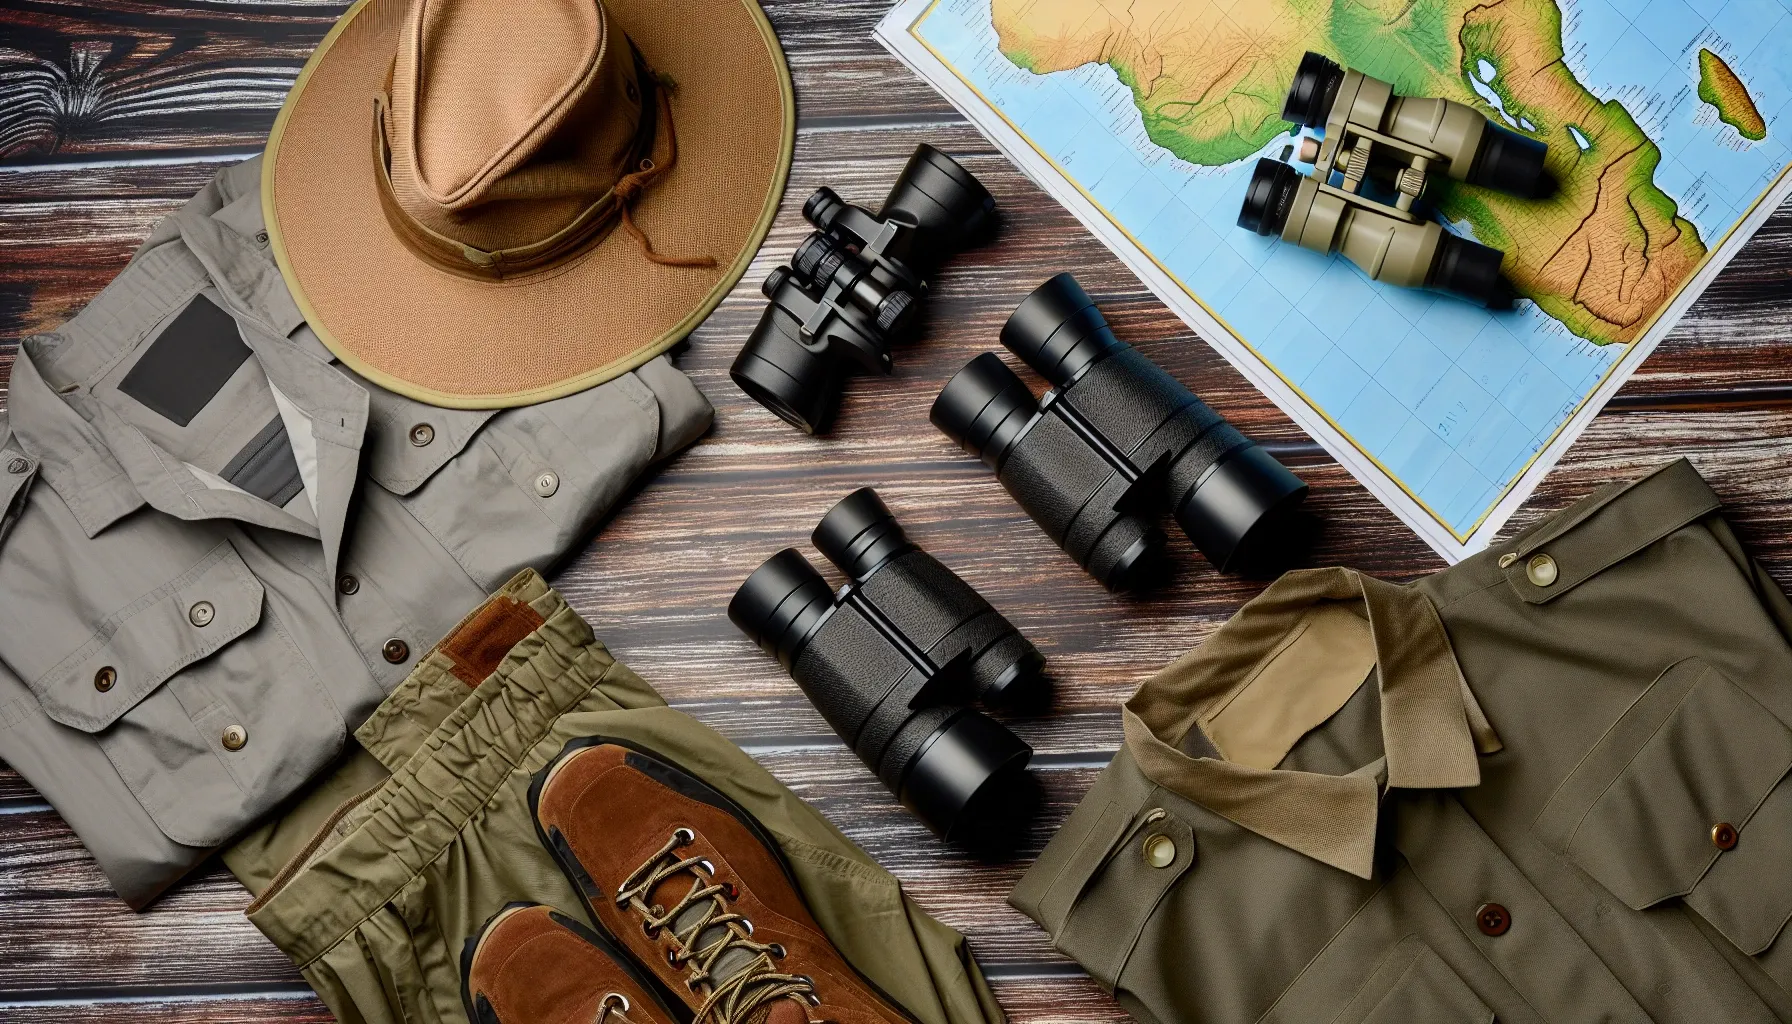 Essential clothing and accessories for an African safari adventure displayed on a wooden table